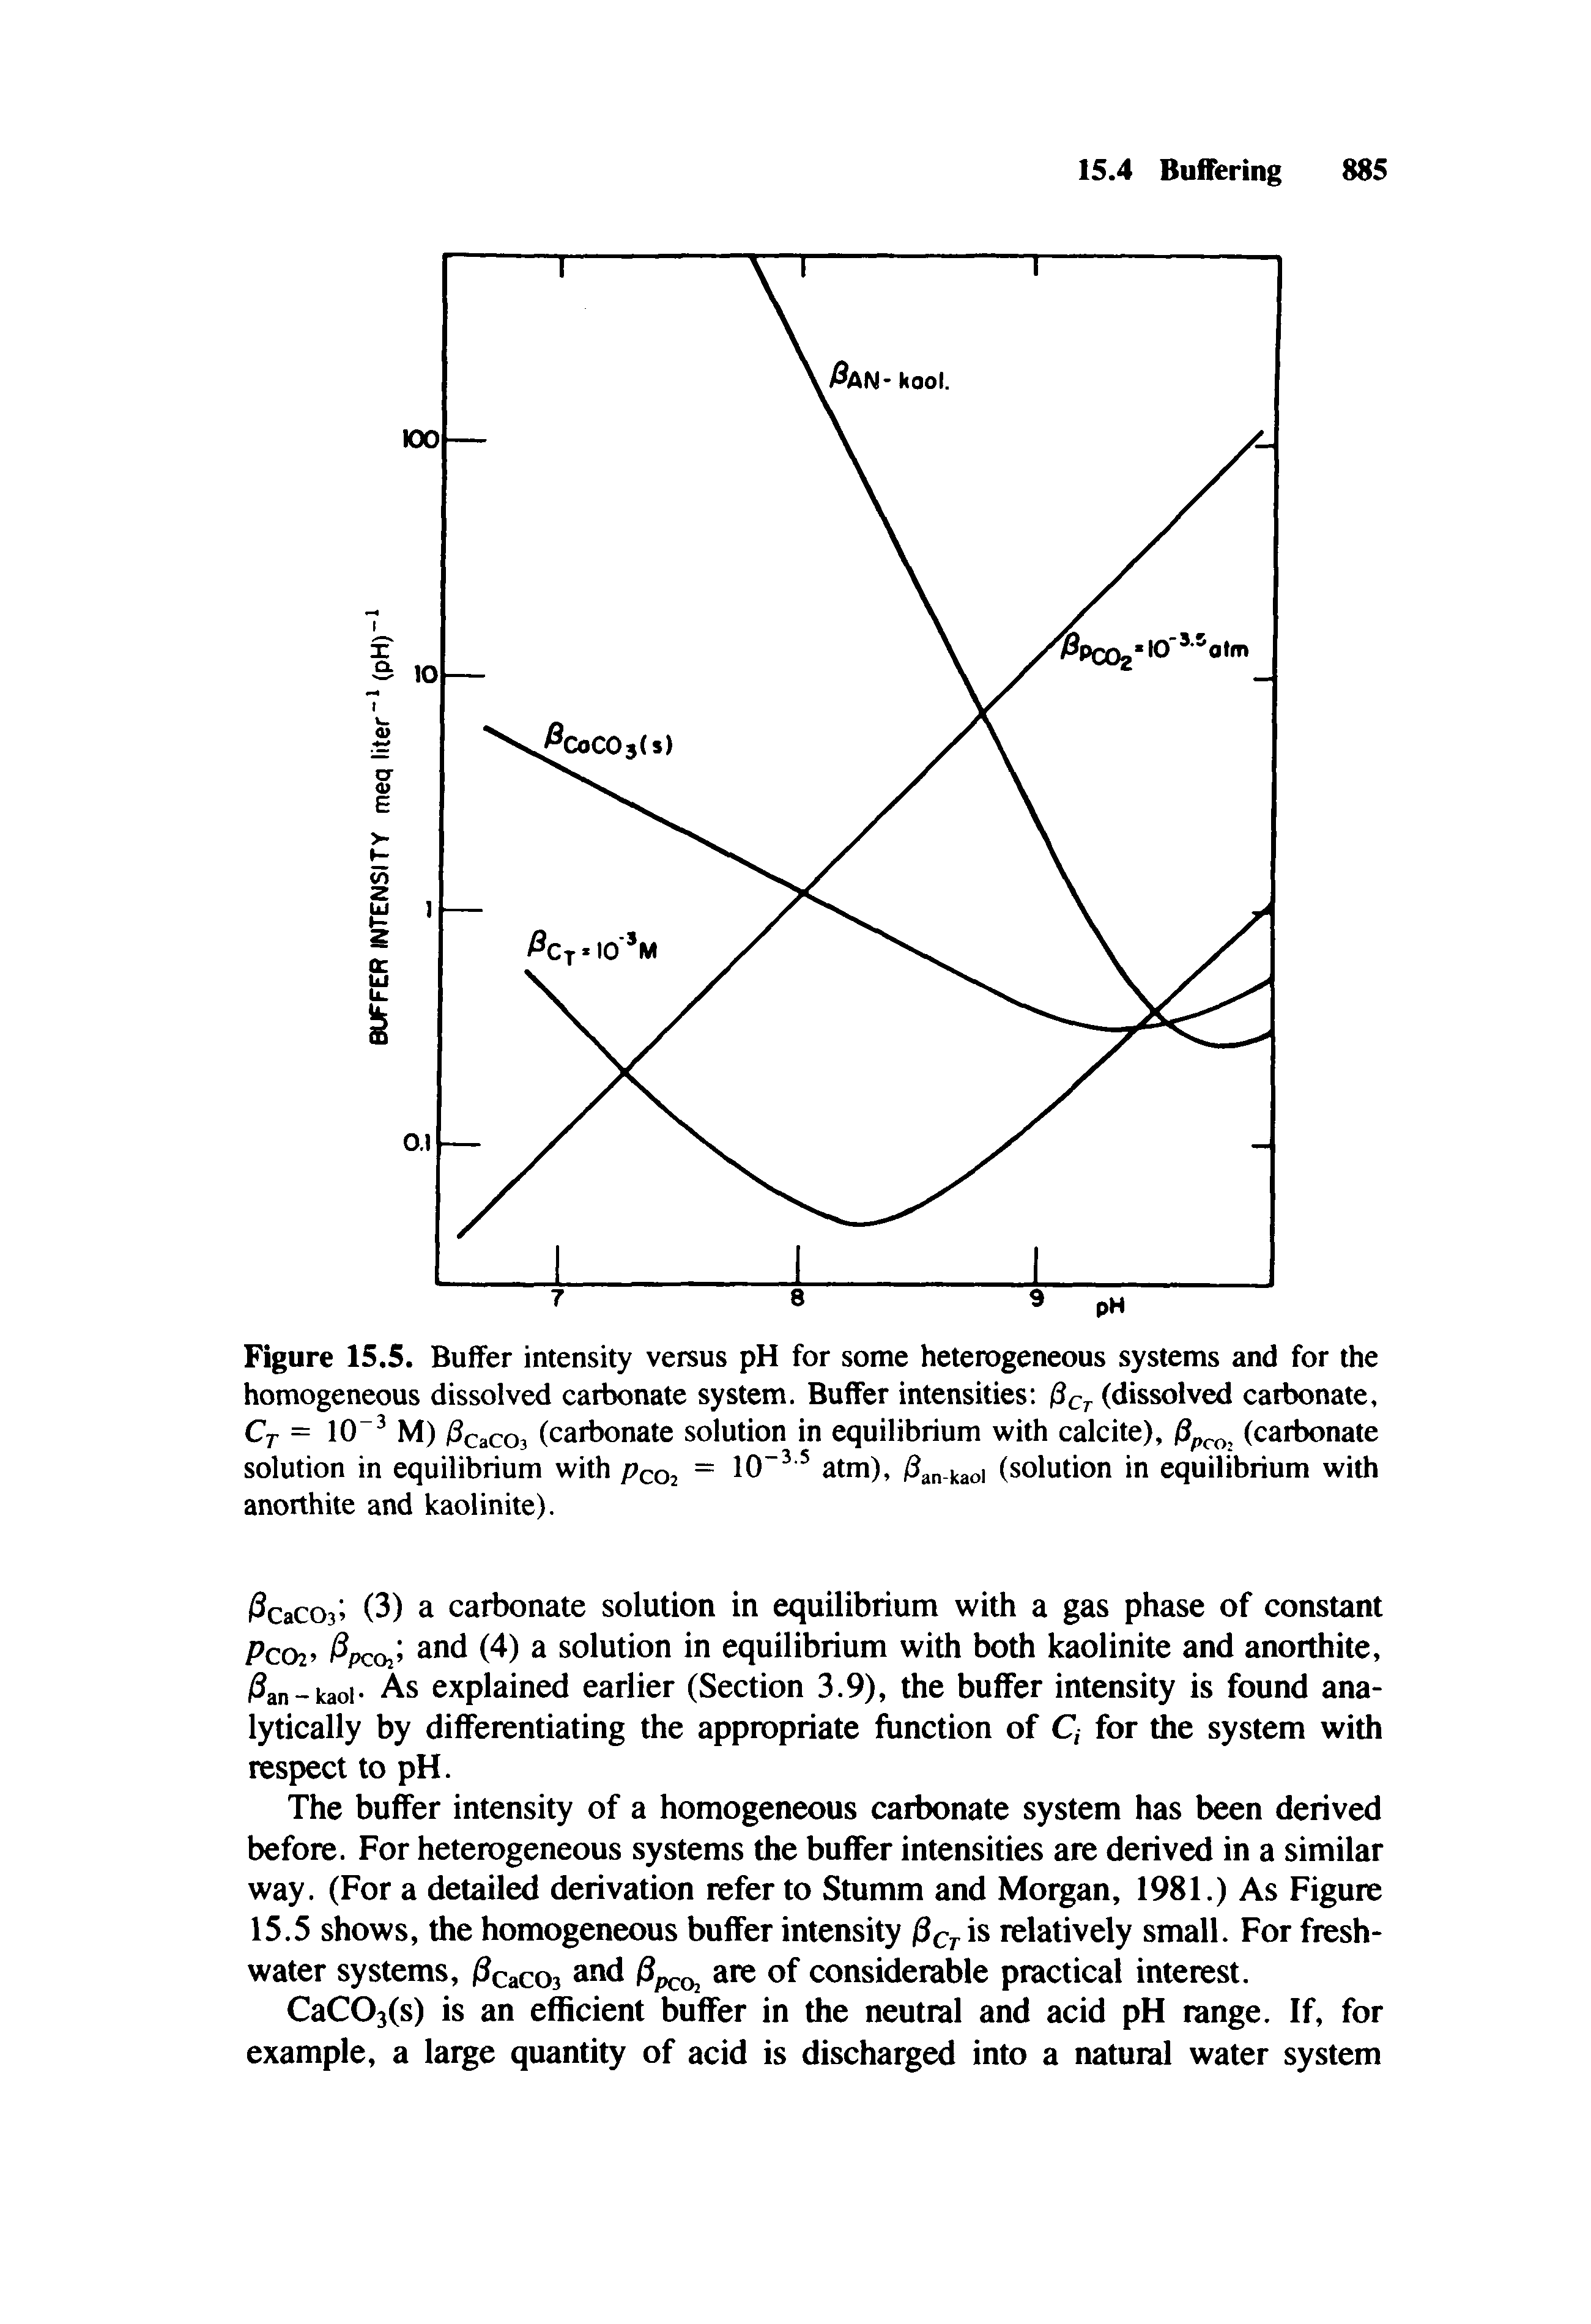 Figure 15.5. Buffer intensity versus pH for some heterogeneous systems and for the homogeneous dissolved carbonate system. Buffer intensities 0ct (dissolved carbonate, Cr = 10 M) /Scacoj (carbonate solution in equilibrium with calcite), (carbonate solution in equilibrium with pco2 atm), /3an kaoi (solution in equilibrium with...